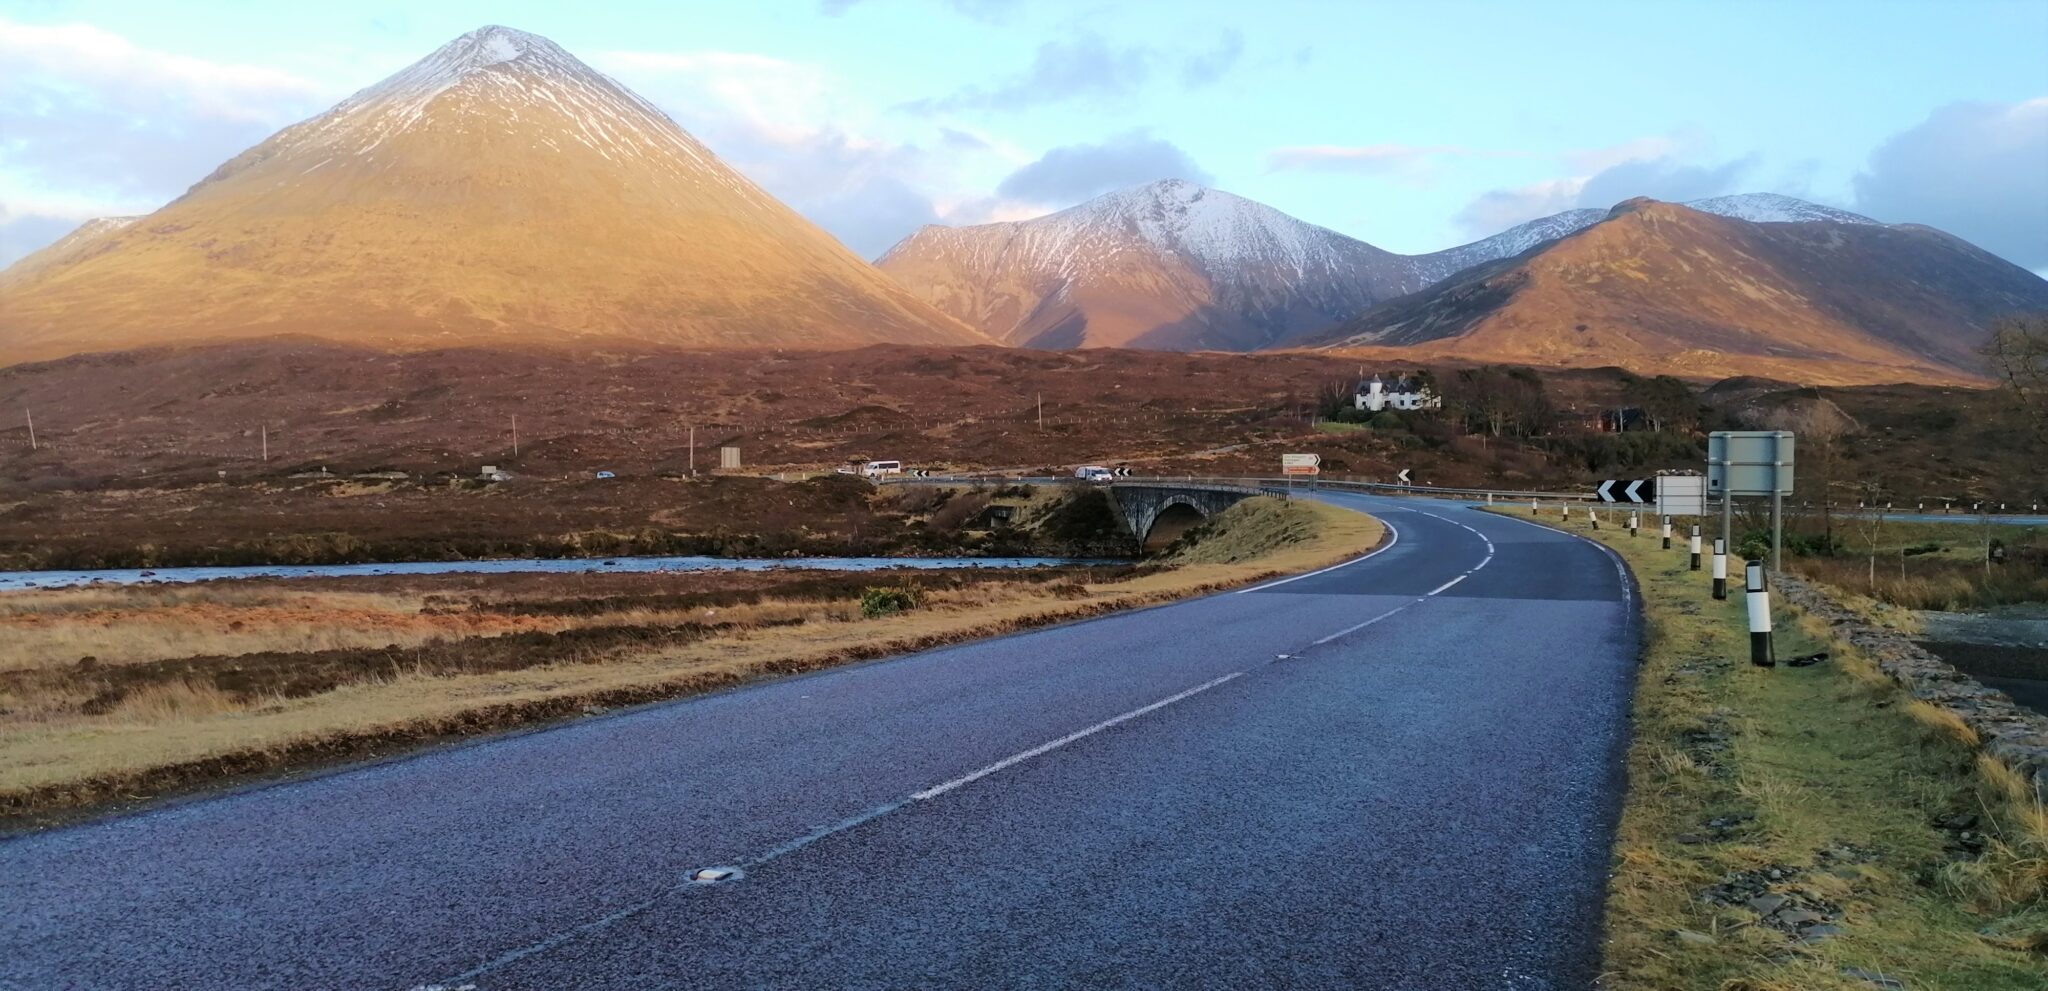 MEDIA UPDATE: OVENIGHT SURFACING IMPROVEMENTS ON THREE LOCATIONS ON THE A87, ISLE OF SKYE RESCHEDULED